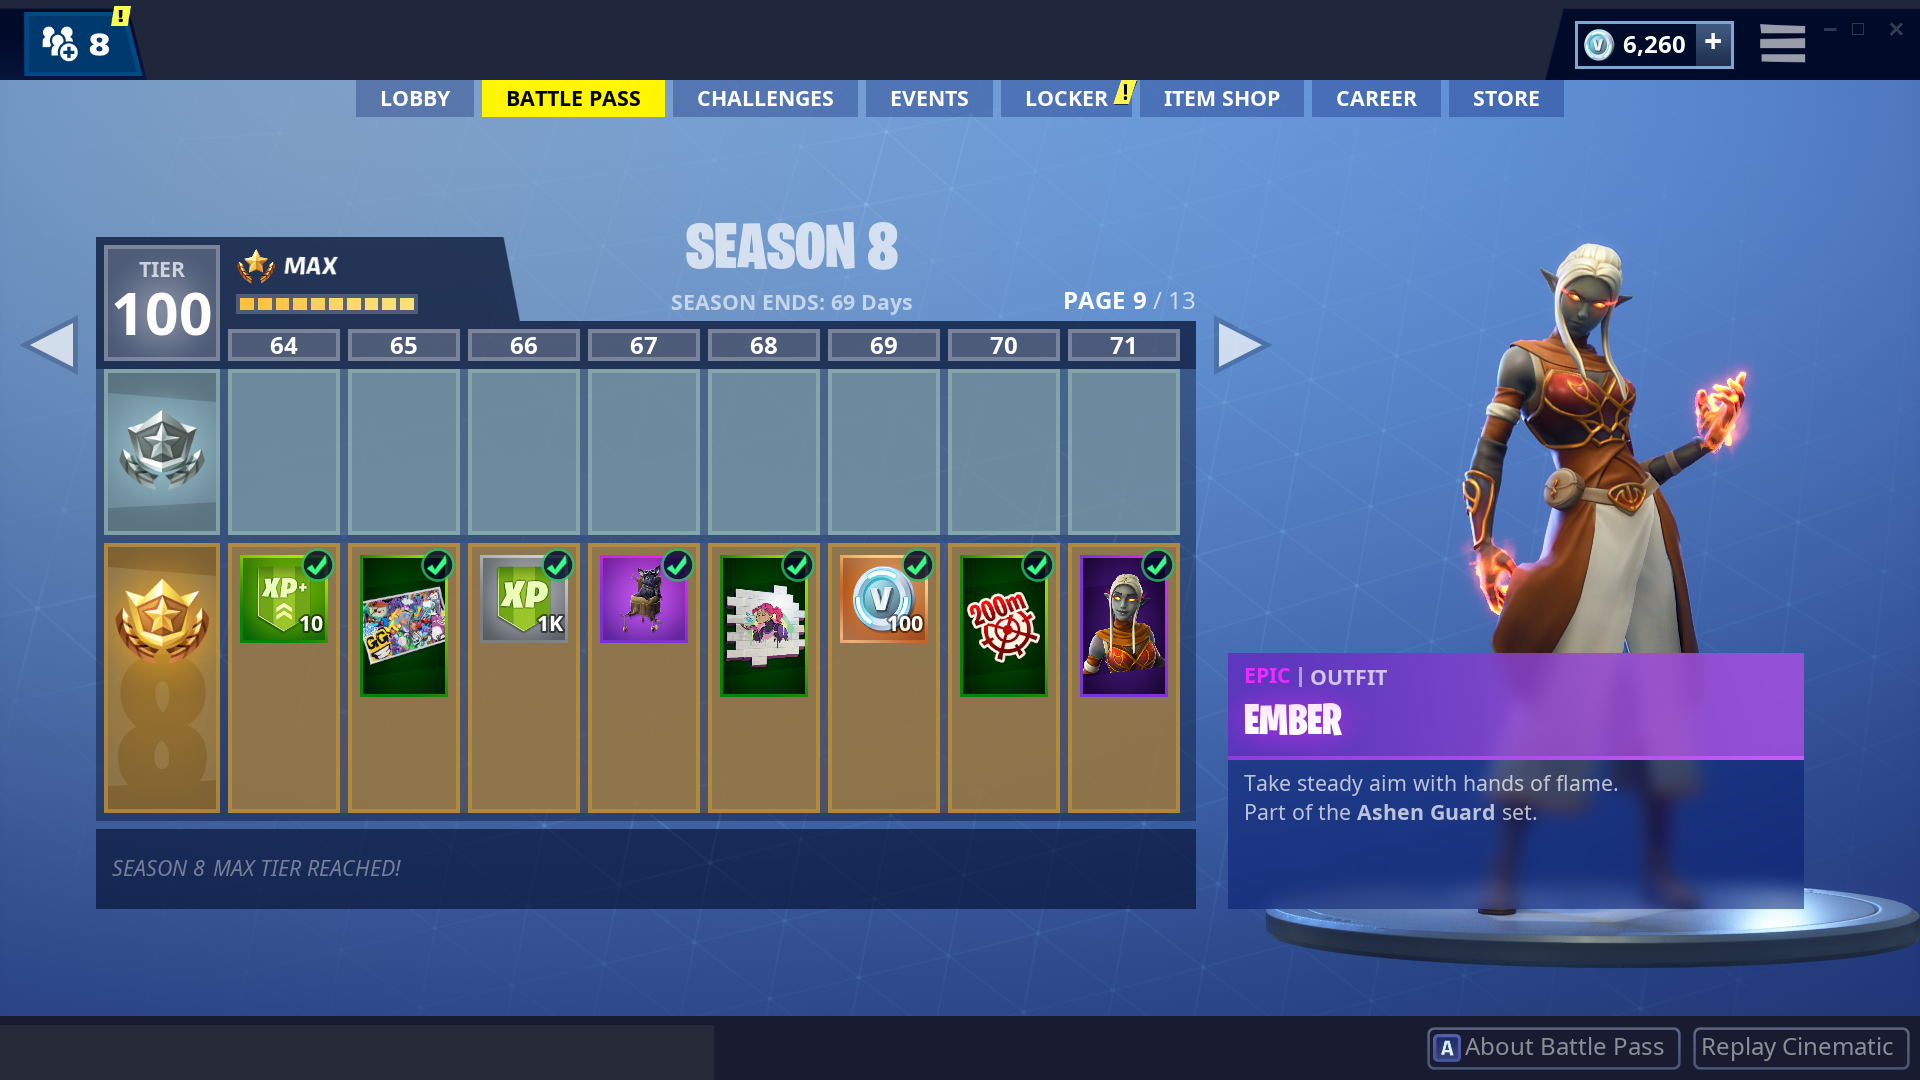 Fortnite Season 8 - All Battle Pass Tiers and Rewards ... - 1920 x 1080 png 1348kB